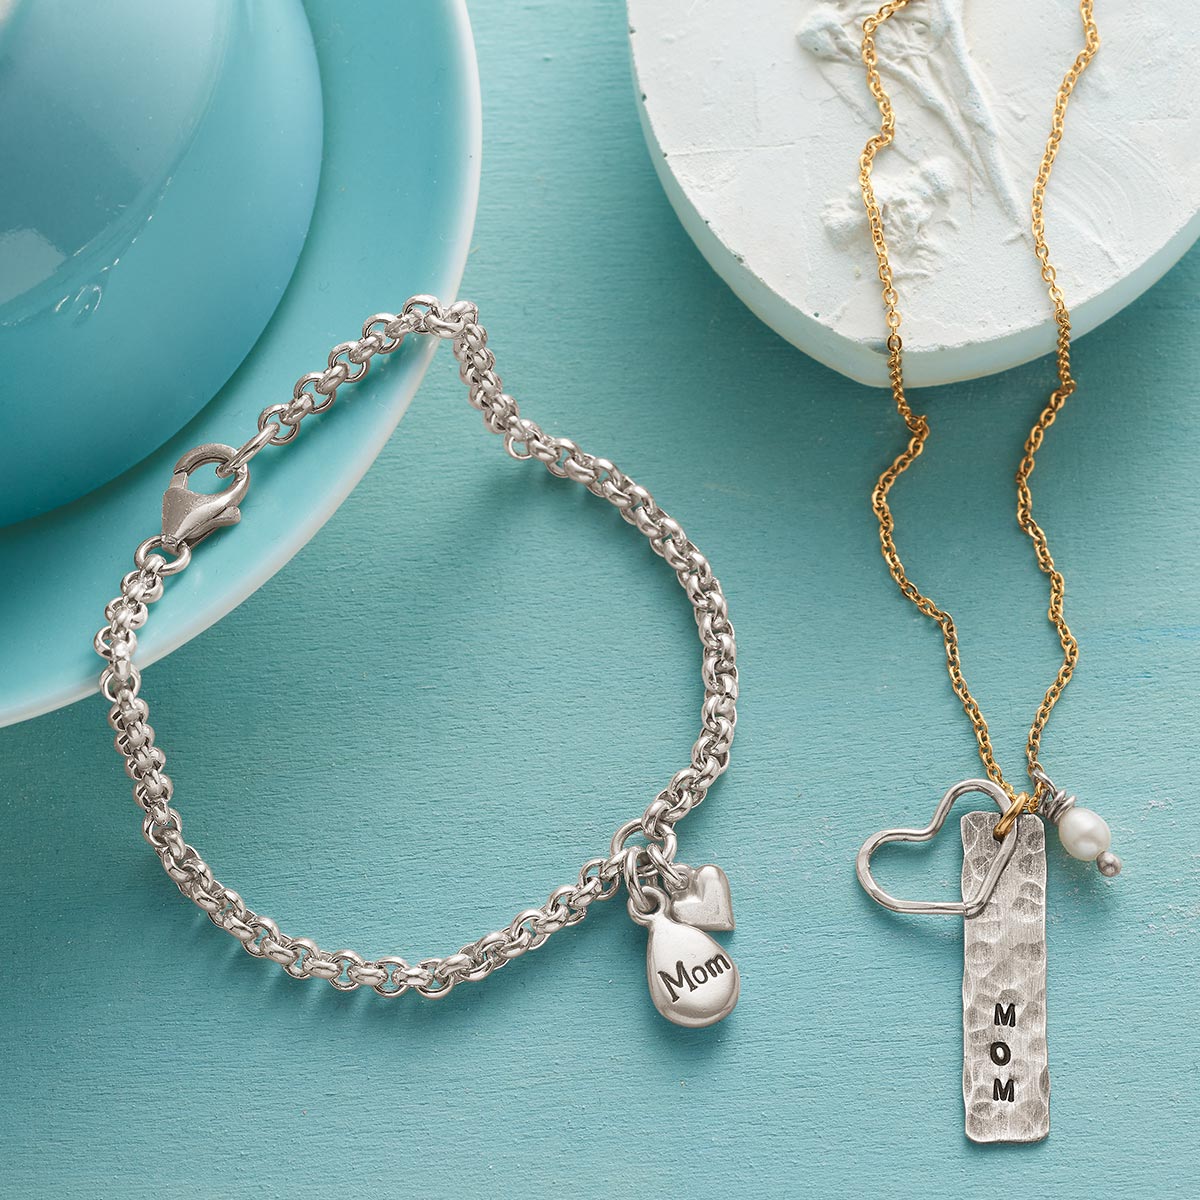 Shop Jewelry Gifts for Mom